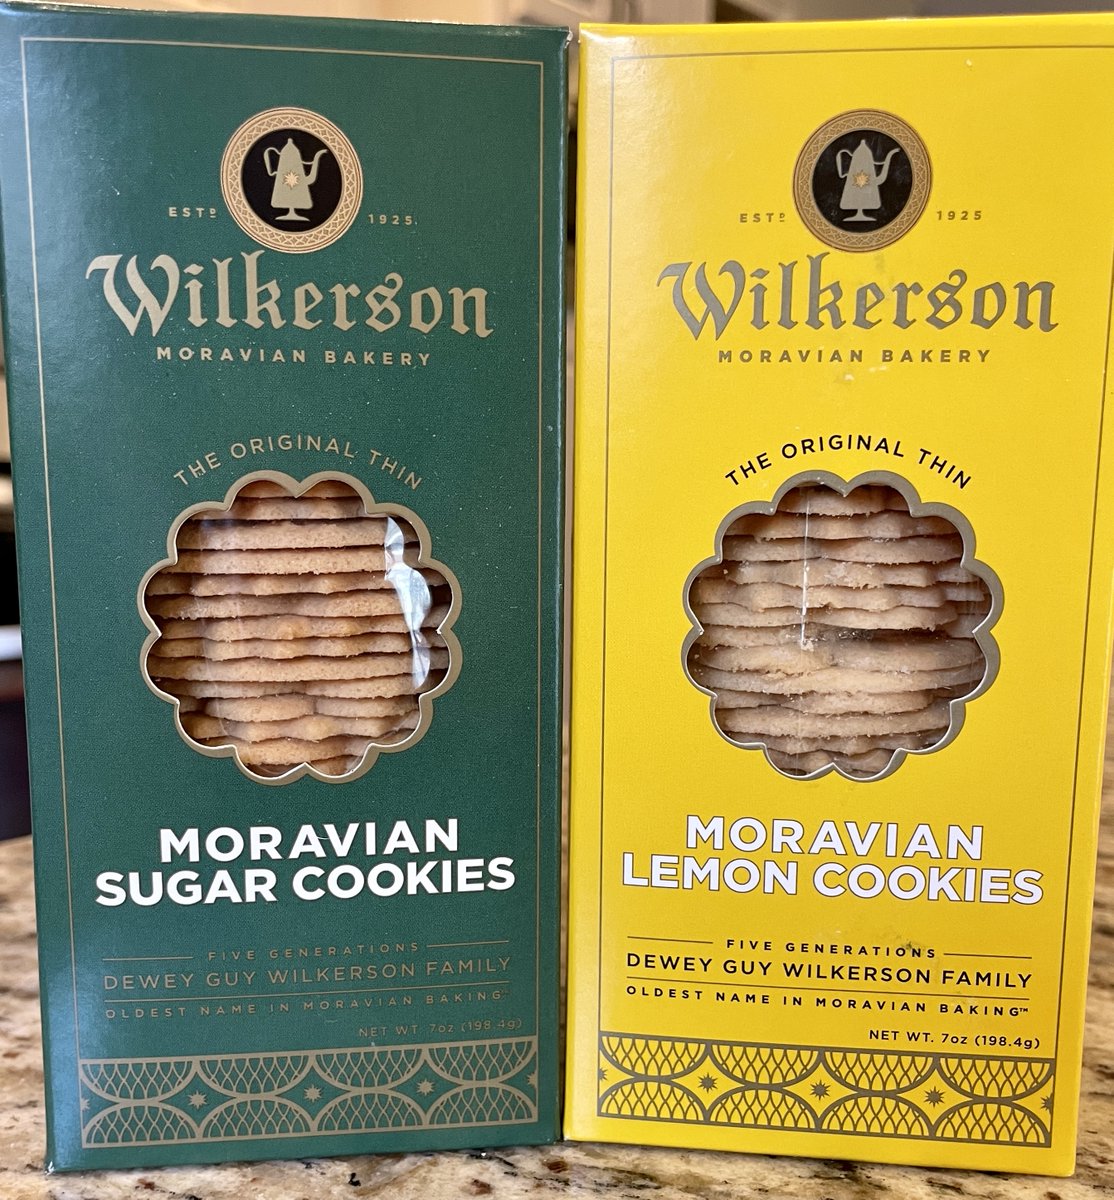 Thank you @WilkersonBakery for sending some of your Moravian Sugar and Lemon Cookies for our #STEIrving attendees to try! Baking has been their family's pride, passion, and way of life since the early 1920s. And thank you @StuckOntheGo for the recommendation!